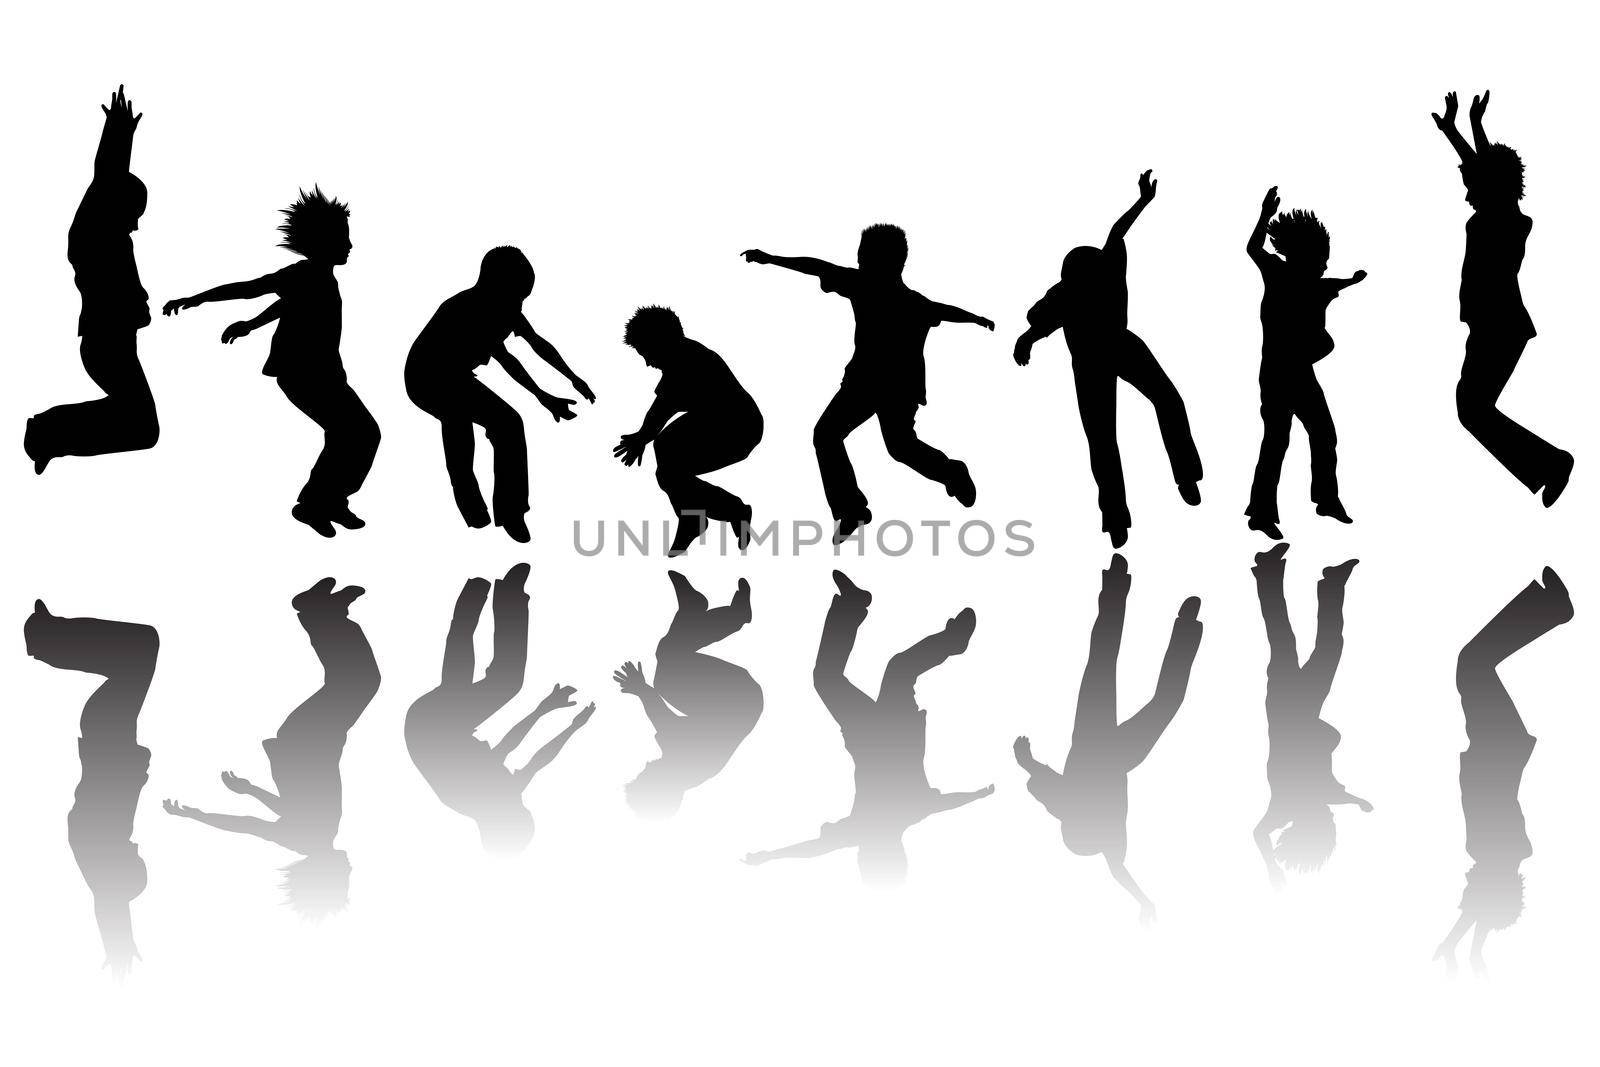 Silhouettes of kids jumping isolated on white background with shadows by hibrida13